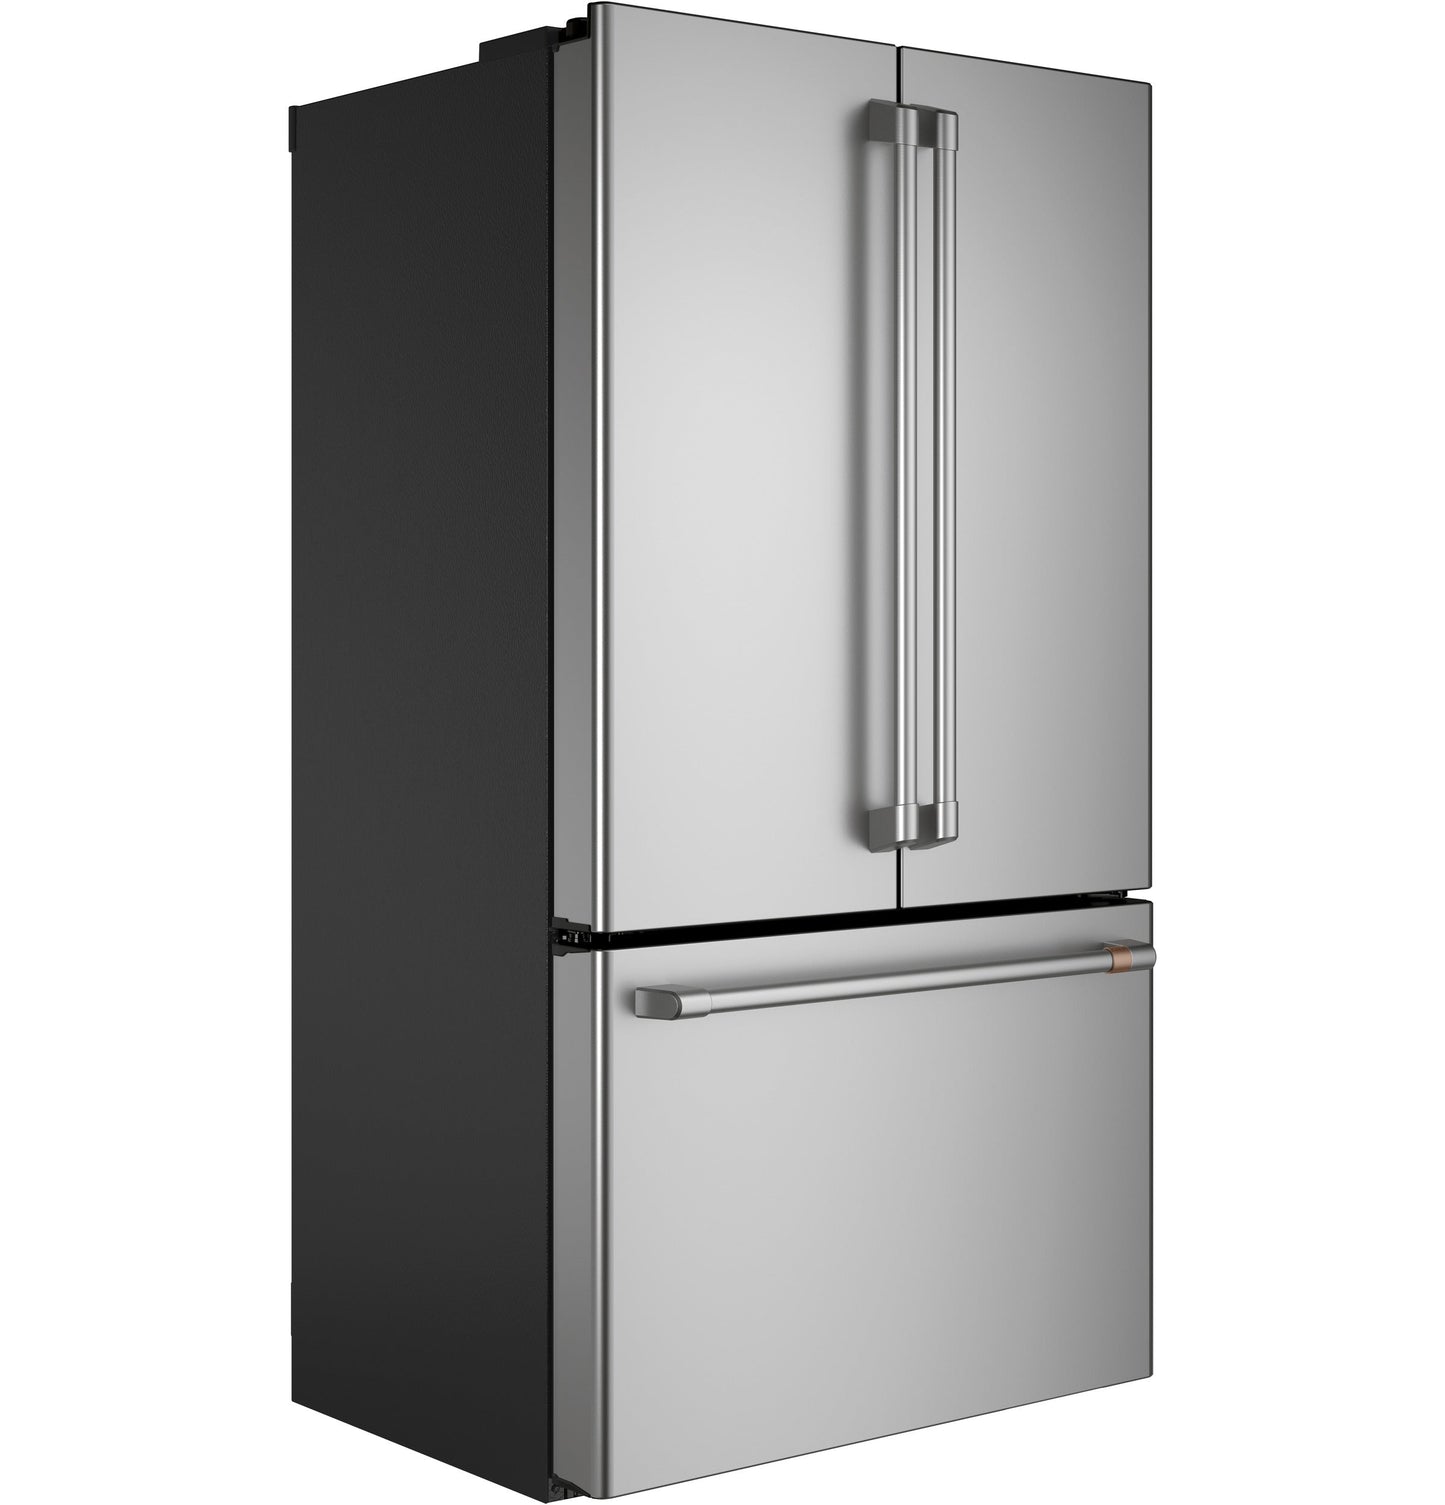 Café 23.1 Cu. Ft. Counter-Depth French-Door Refrigerator Stainless Steel - CWE23SP2MS1